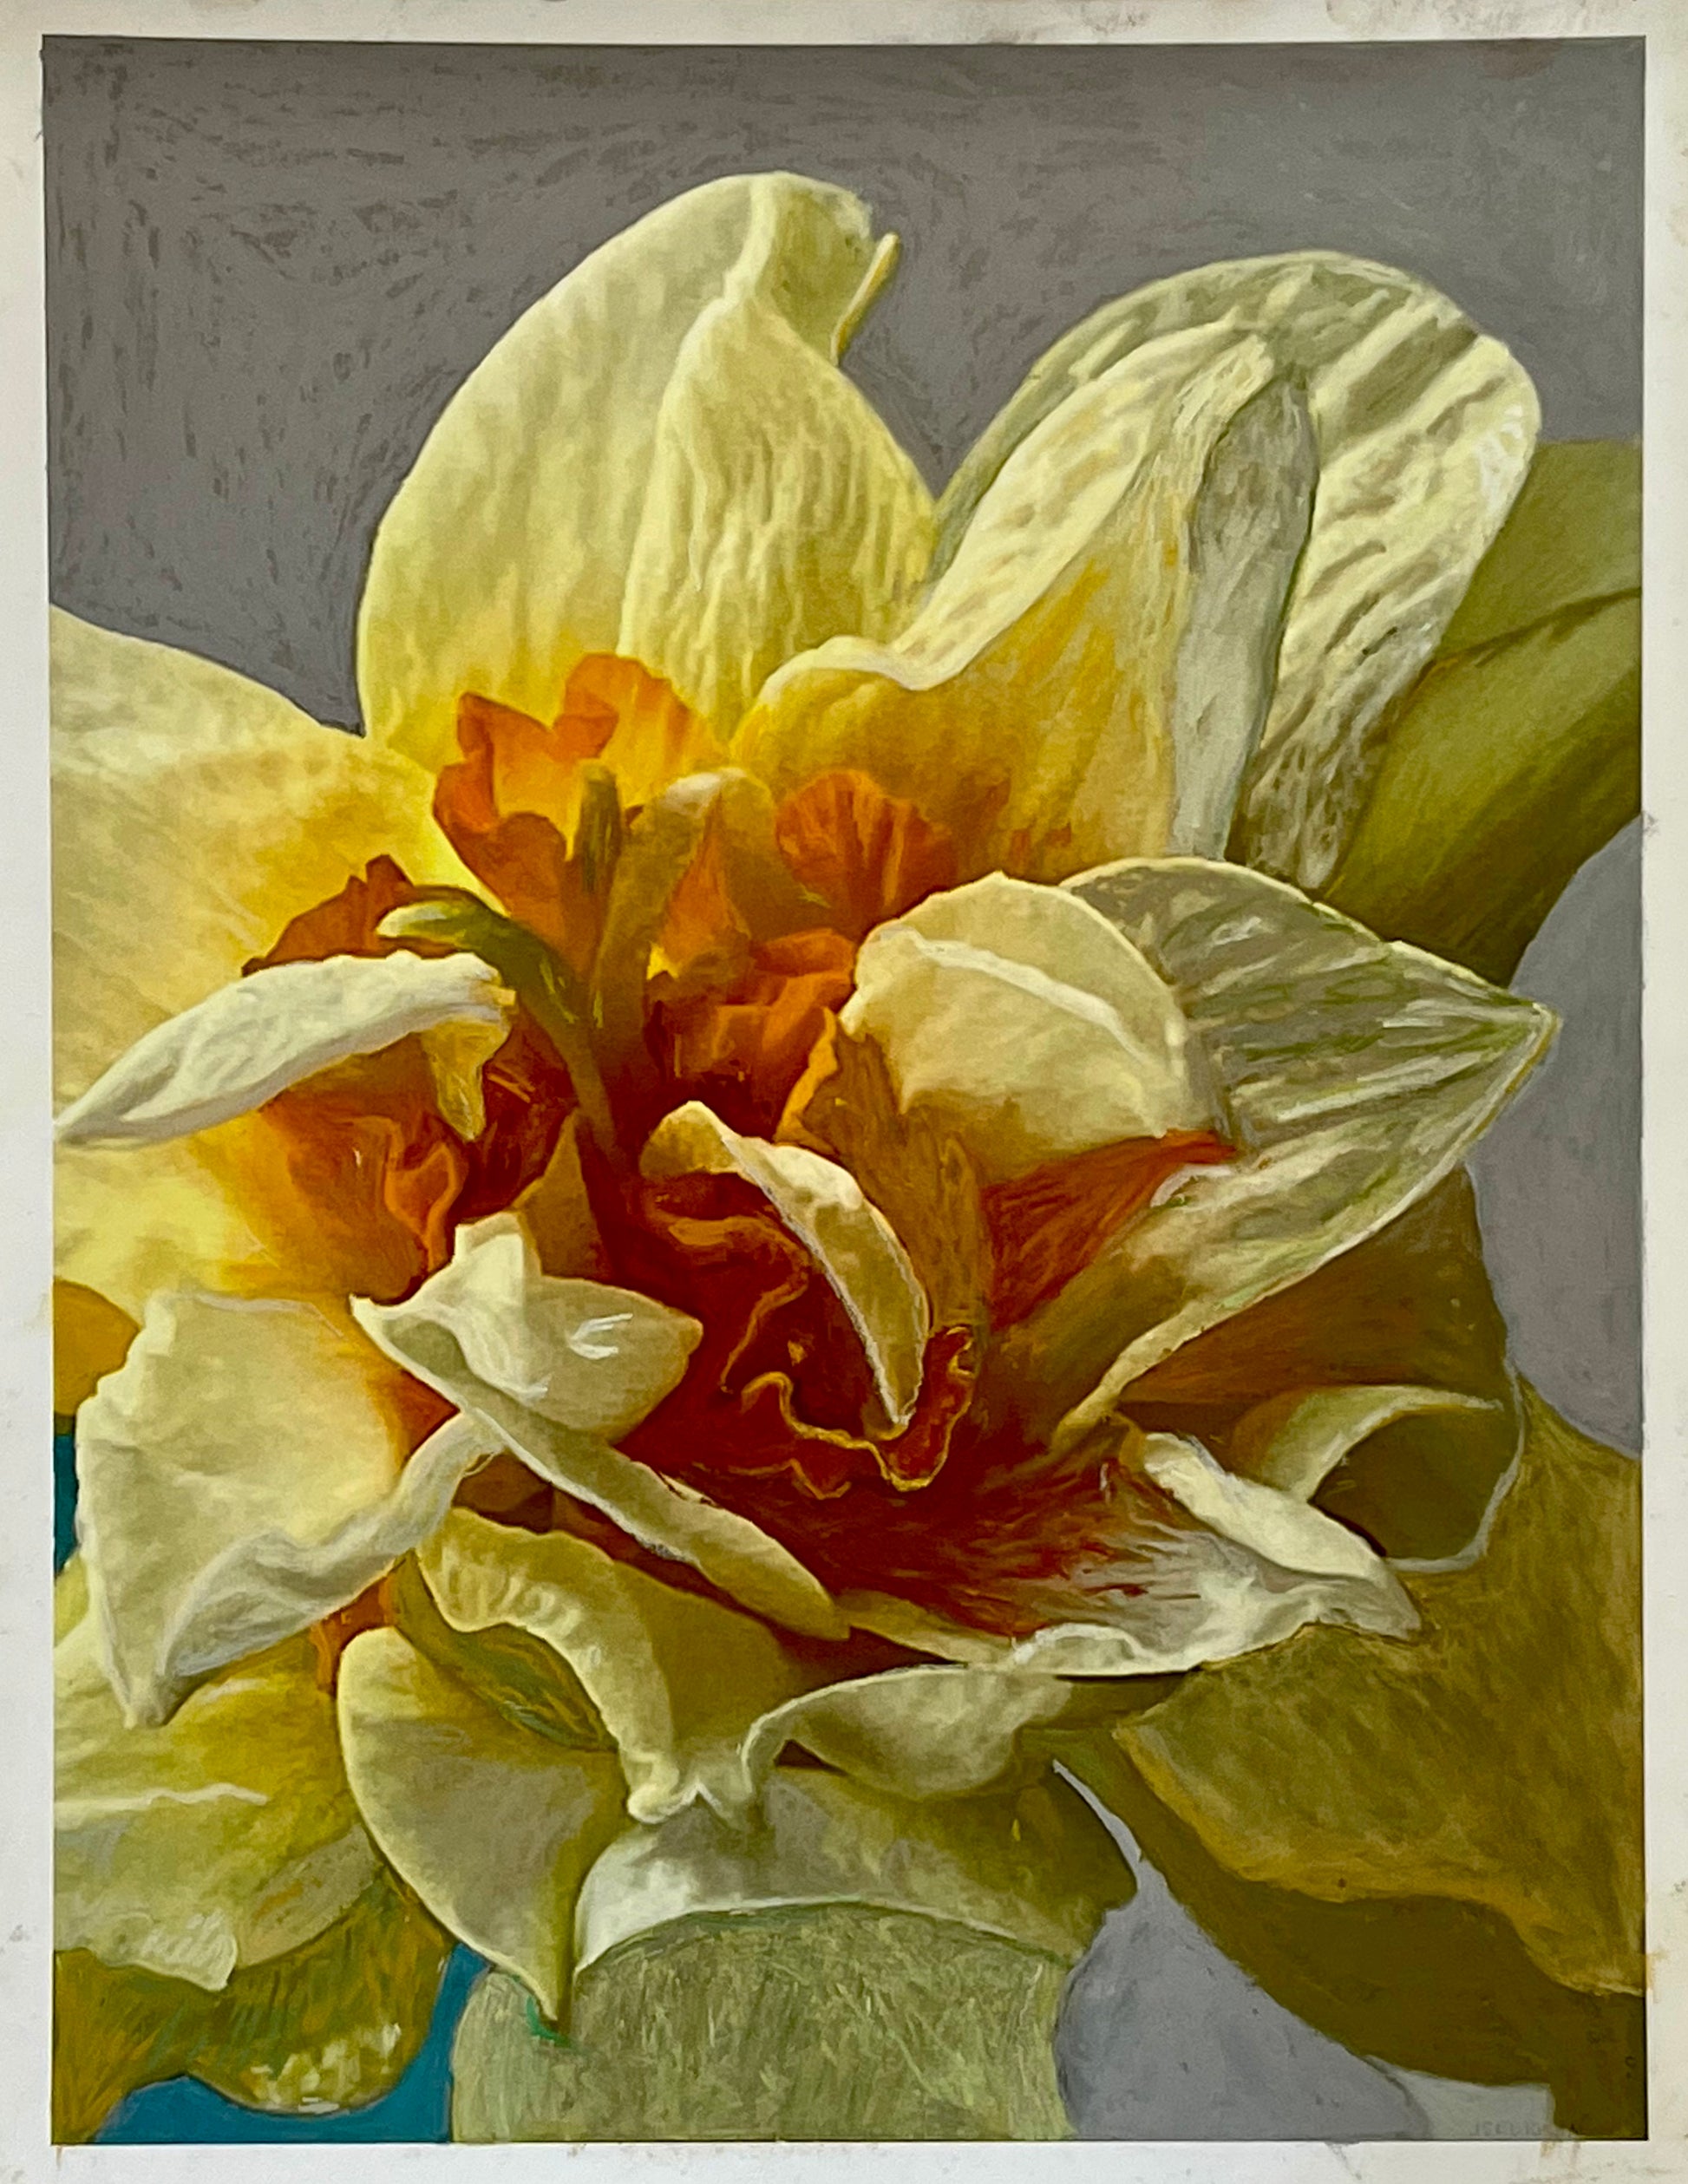 Frilly Daffodil by Judith Seligson - Mourlot Editions - Fine_Art - Poster - Lithograph - Wall Art - Vintage - Prints - Original